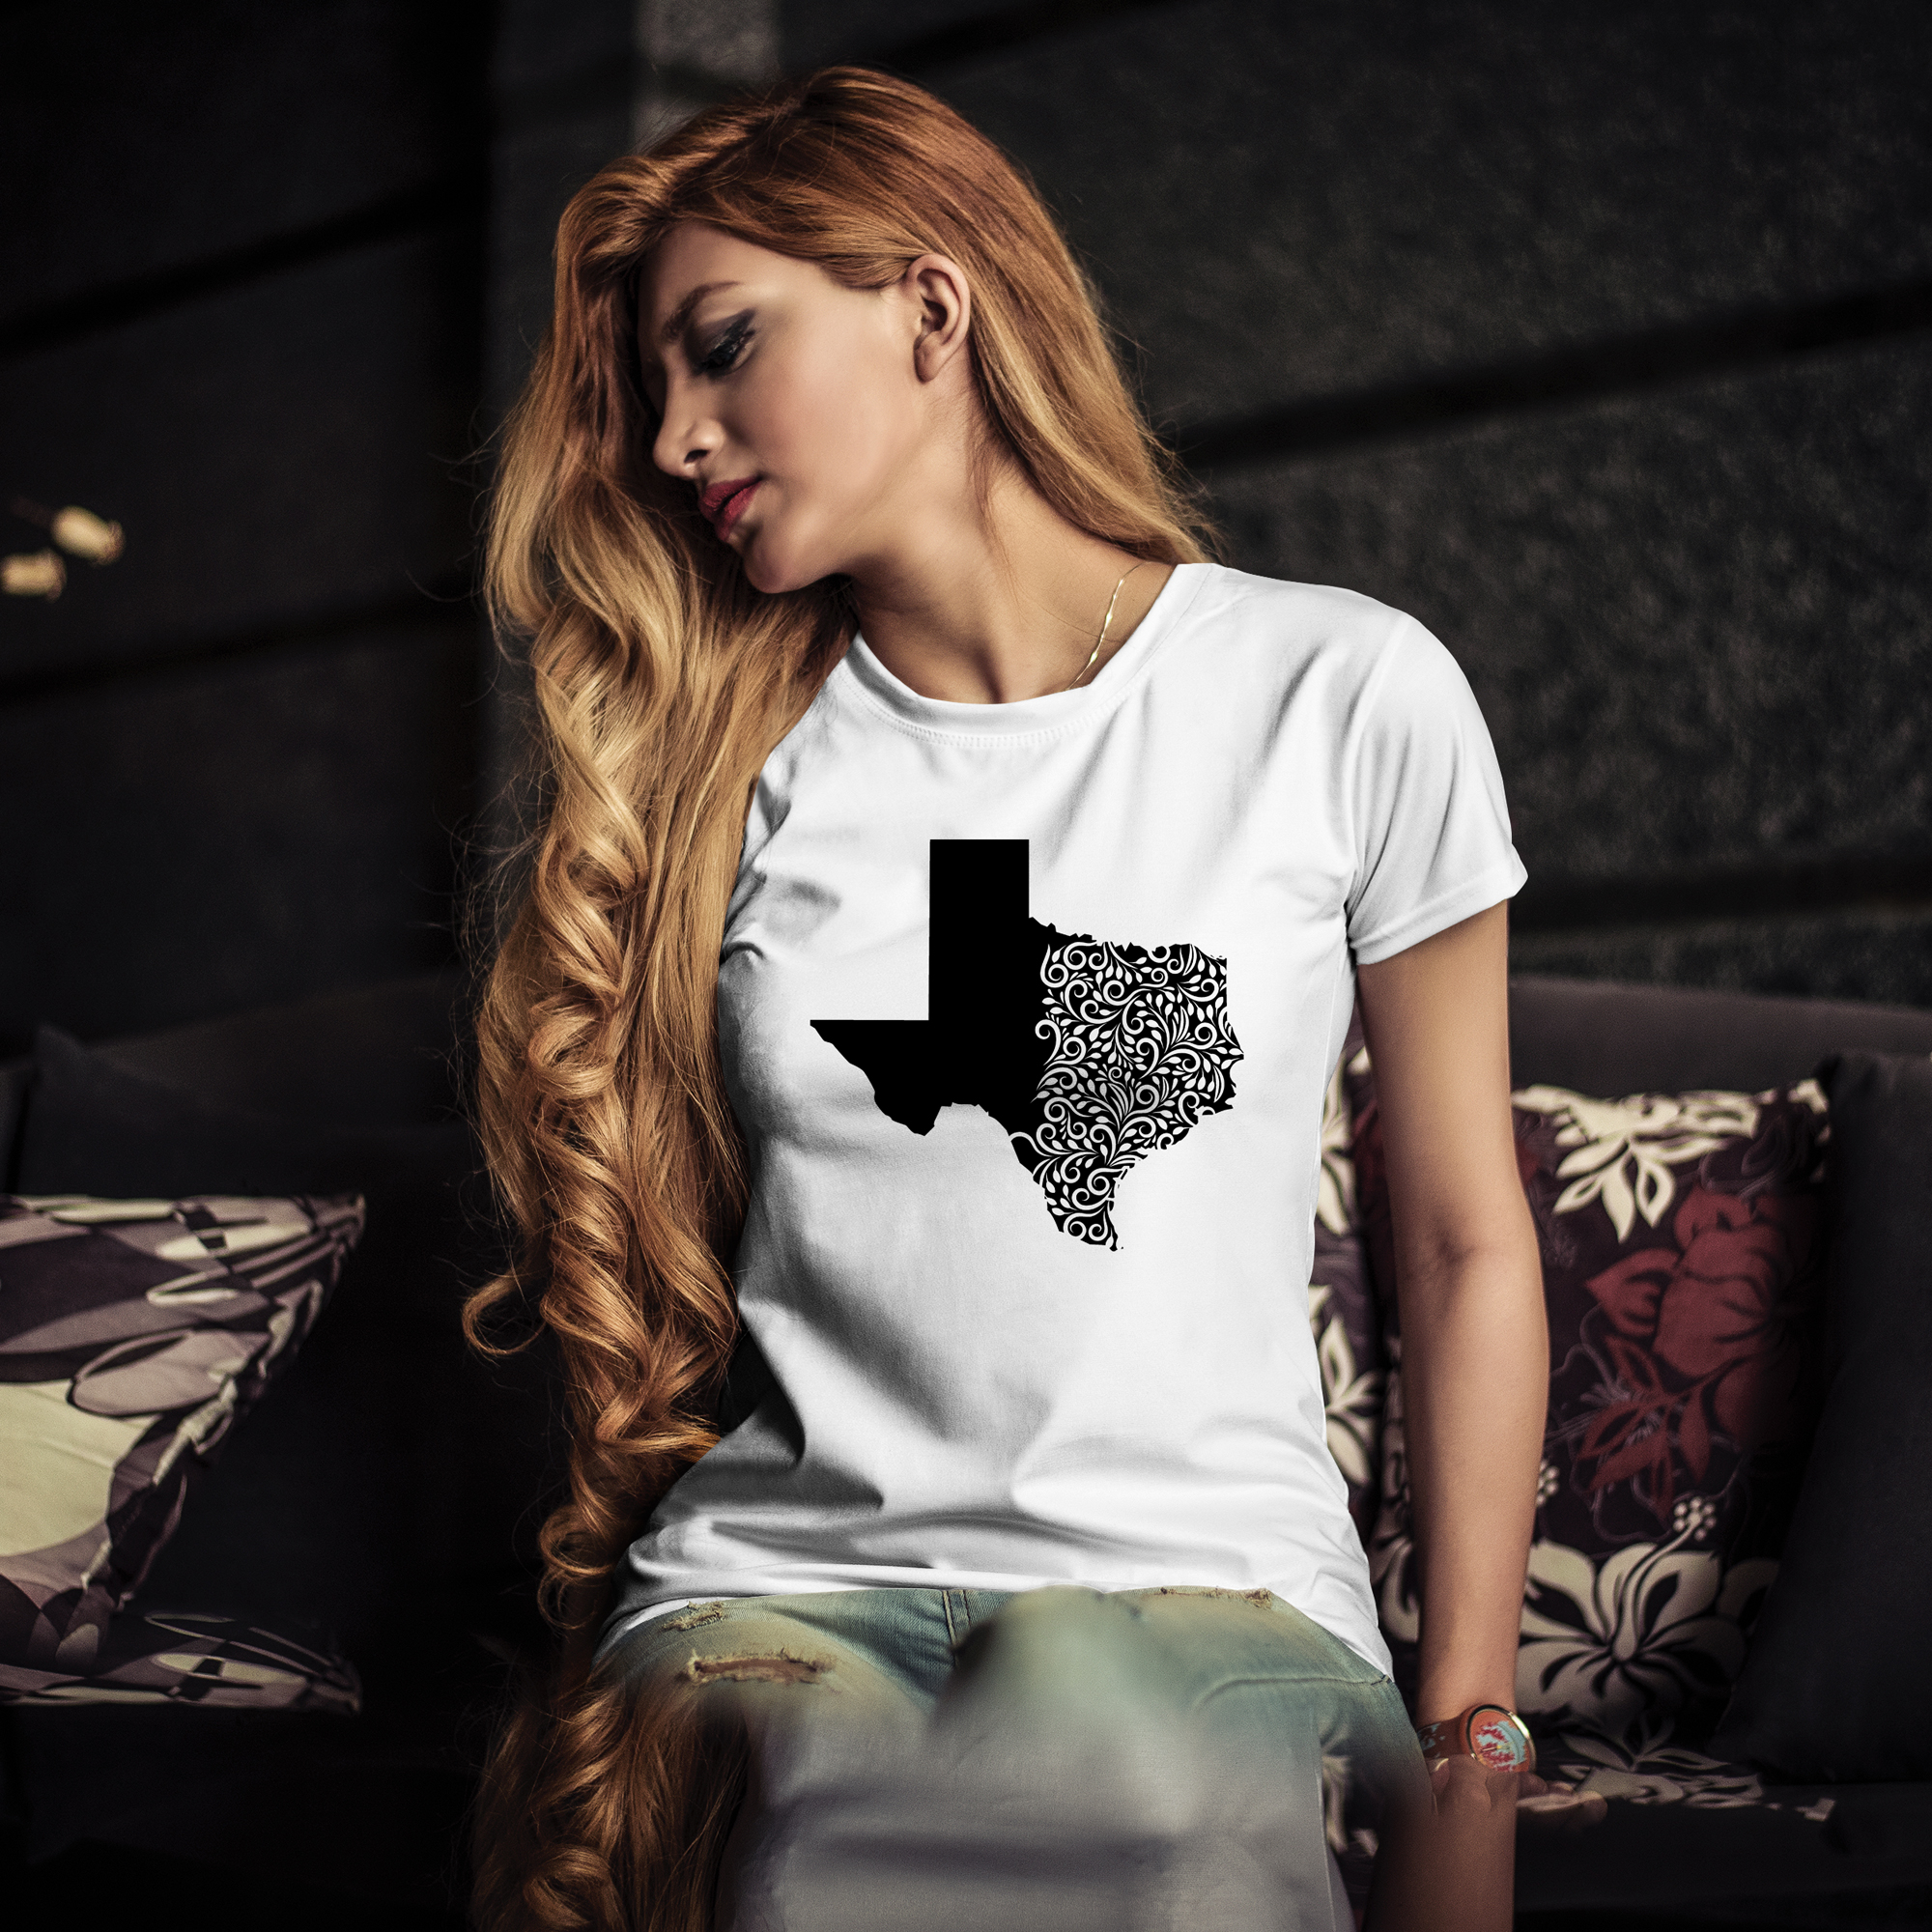 White t-shirt with black illustration of Texas state.